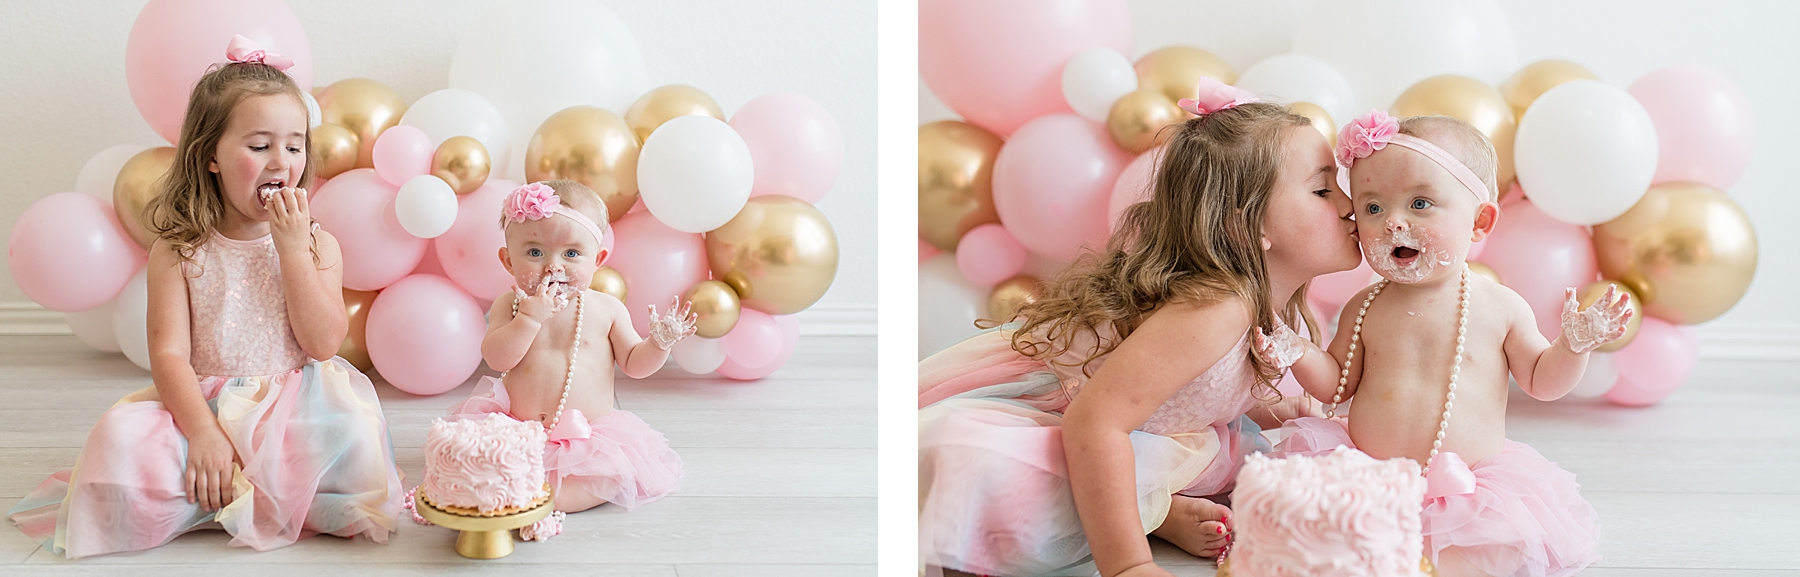 Baby girls first birthday cake smash session | Lindsey Dutton Photography | Dallas Area Family Photographer | studio first birthday photo session, pink first birthday inspiration, first birthday photo session decor ideas | via lindseyduttonphotography.com